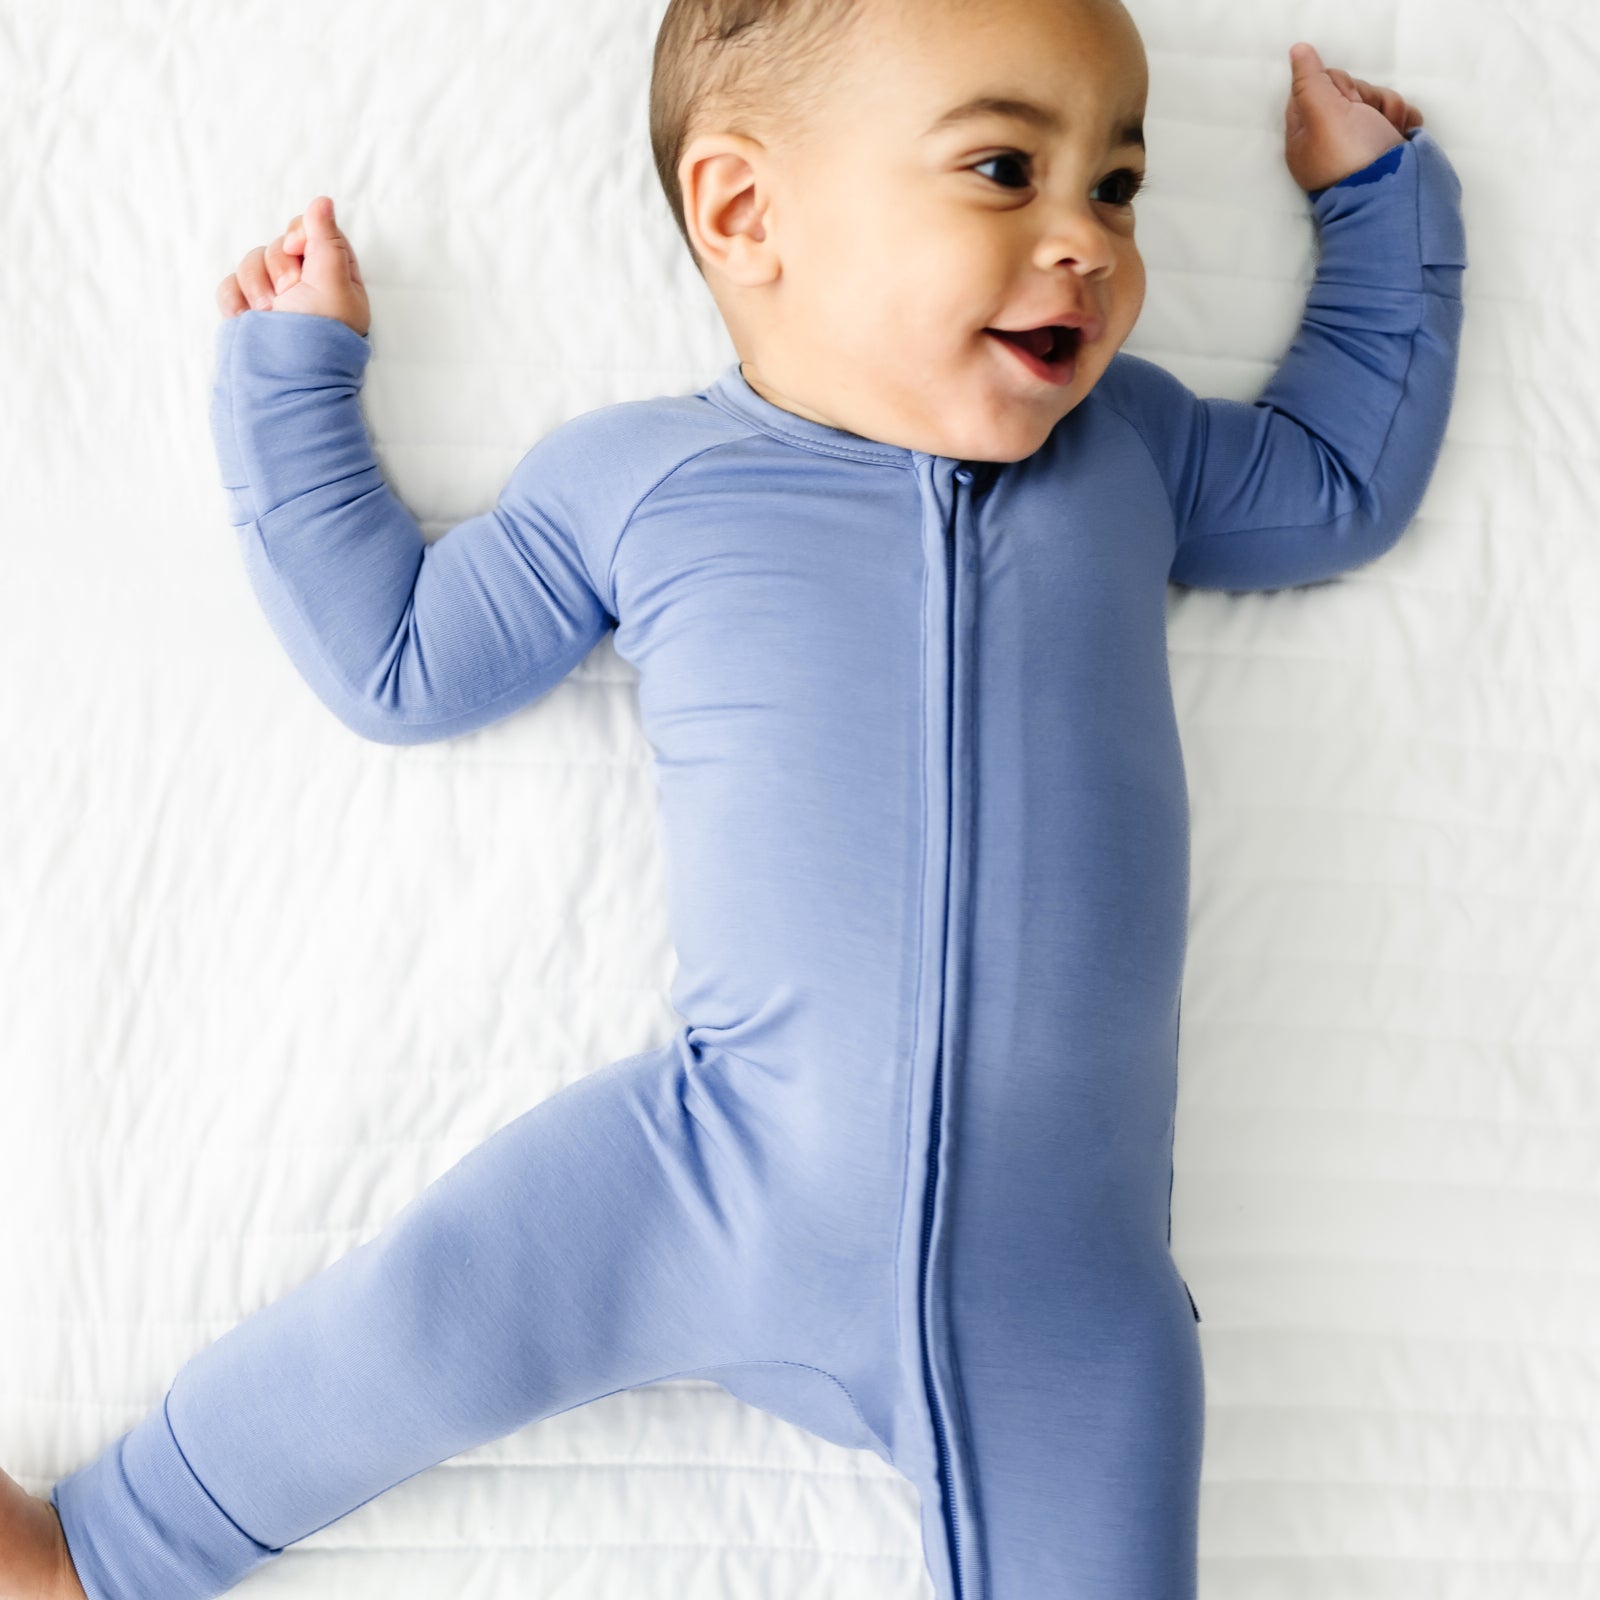 Child laying on a bed wearing a Slate Blue zippy